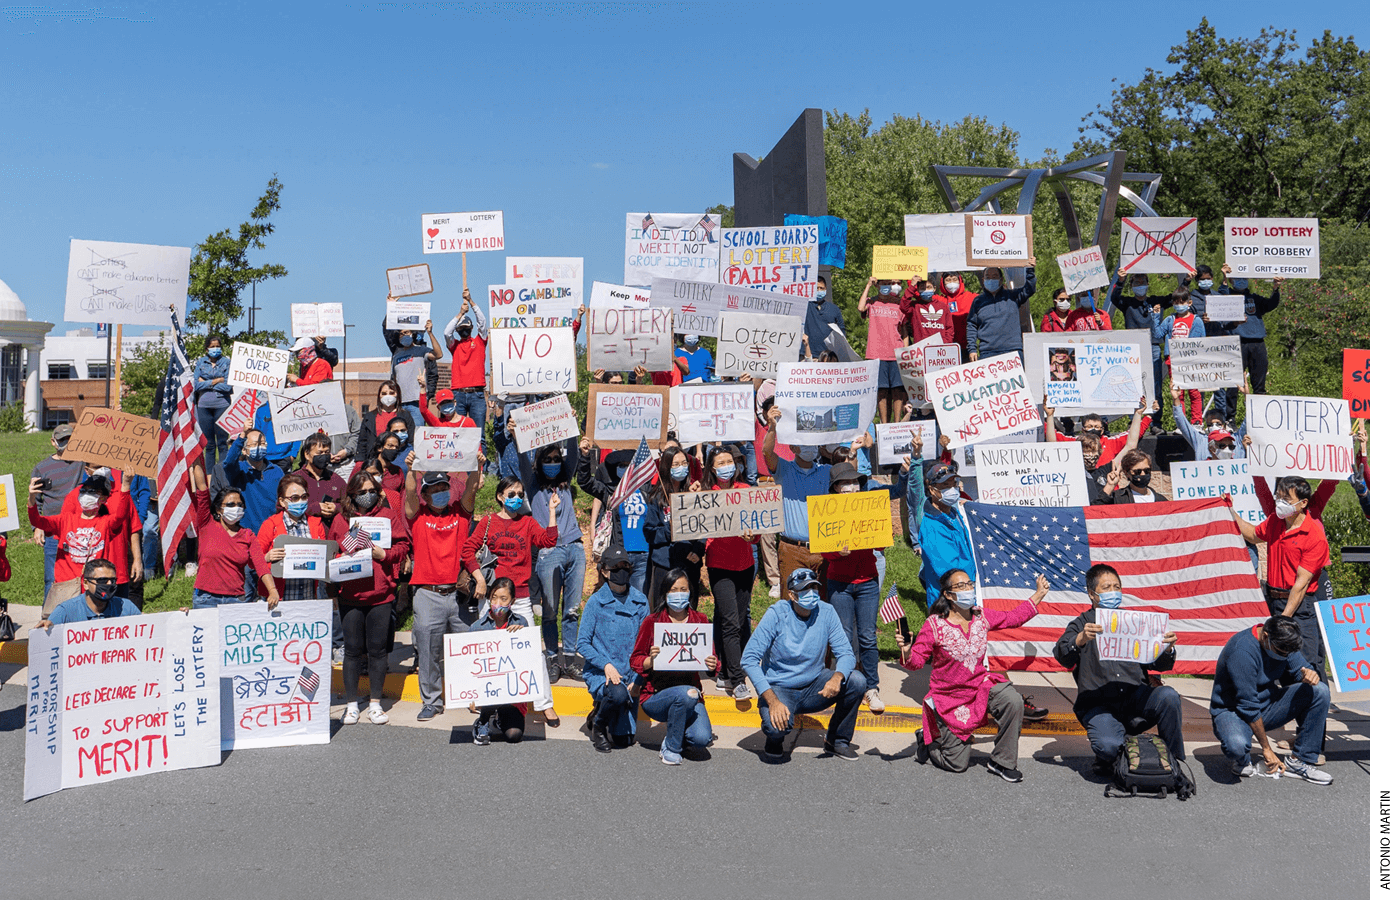 About 200 people protested the removal of merit-based admissions at Thomas Jefferson High School for Science and Technology in Virginia. The author is in the front, in pink.